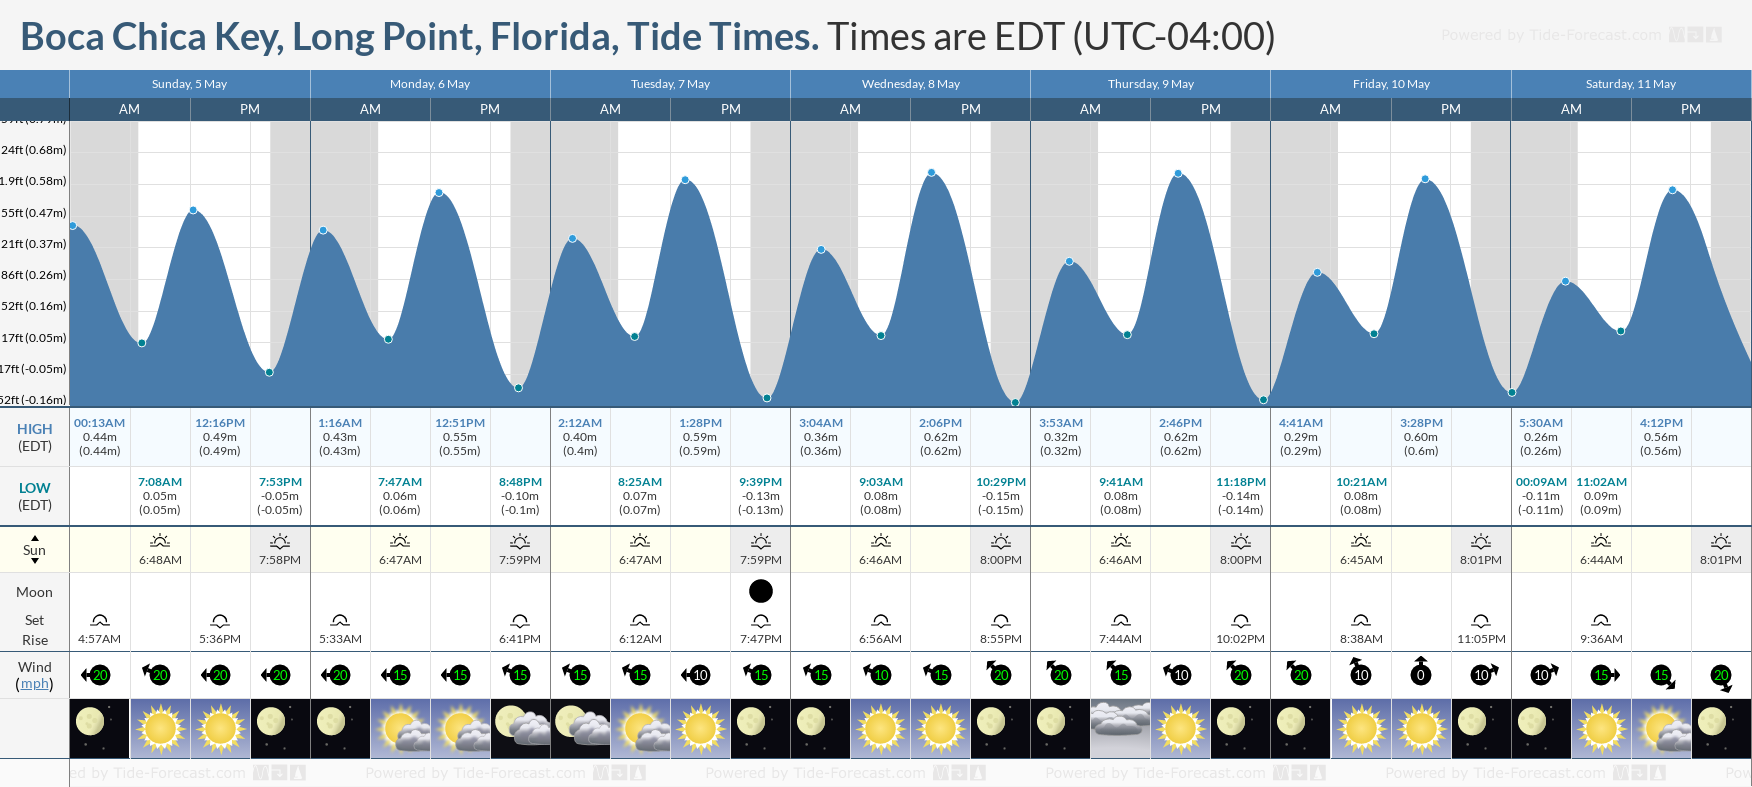 Boca Chica Key, Long Point, Florida Tide Chart including high and low tide tide times for the next 7 days